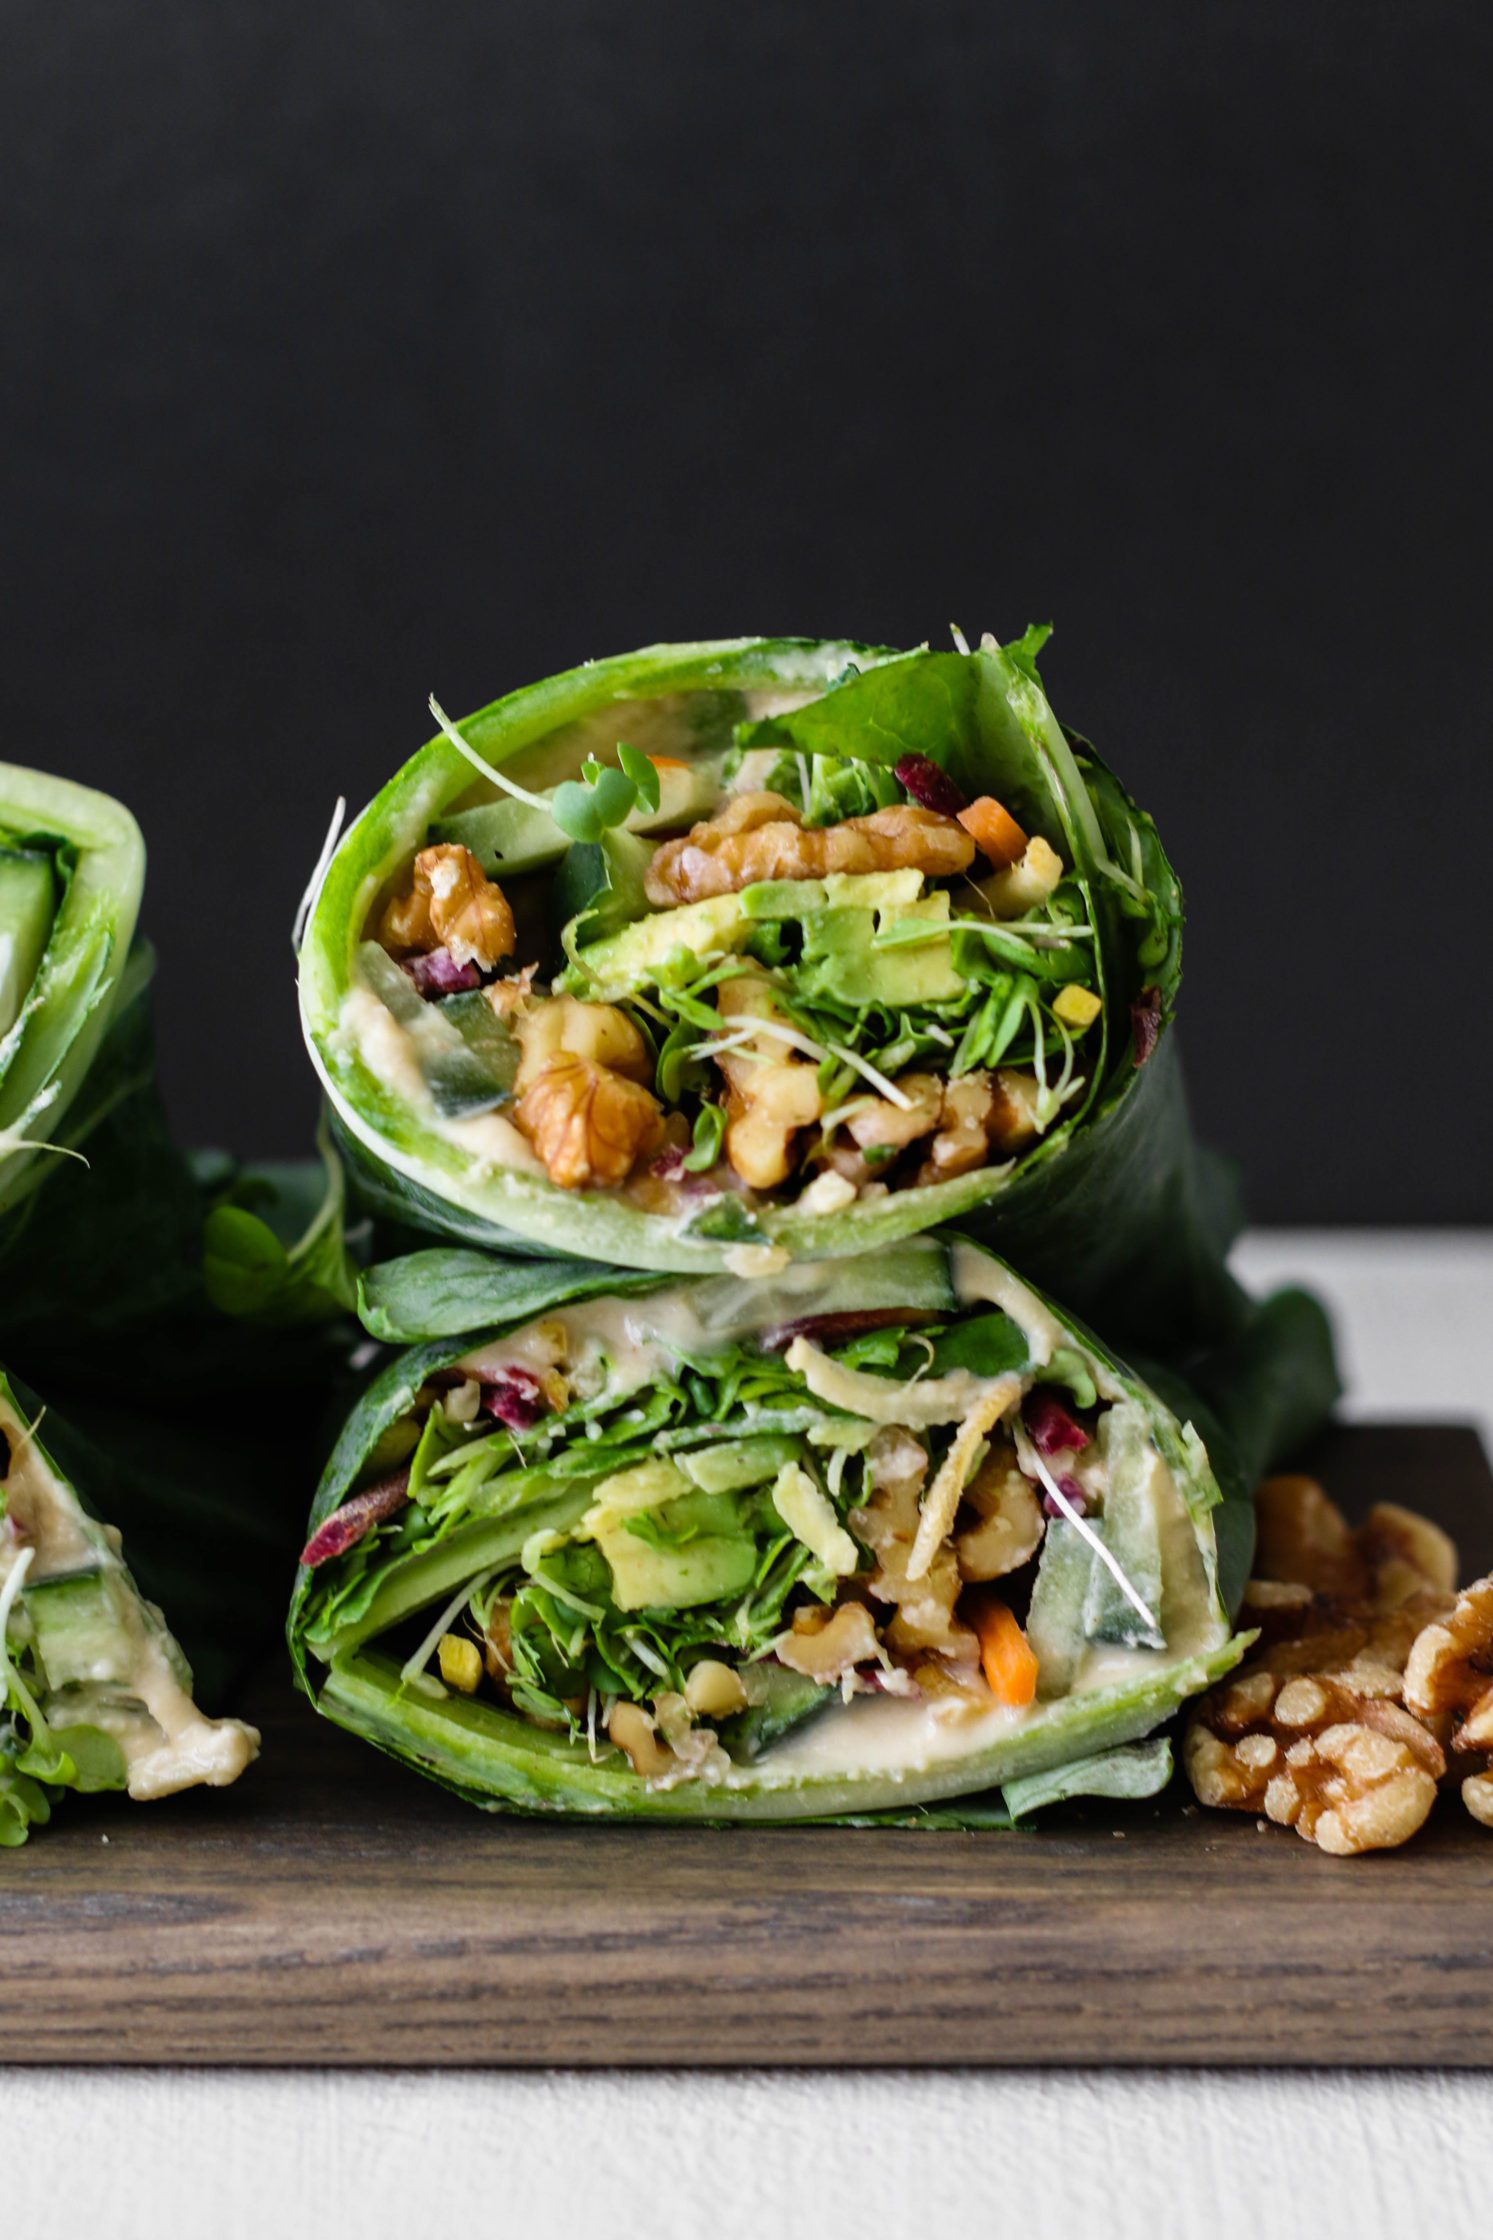 Rainbow Hummus & Avocado Collard Wraps stacked on wooden board with crushed walnuts by Flora & vino